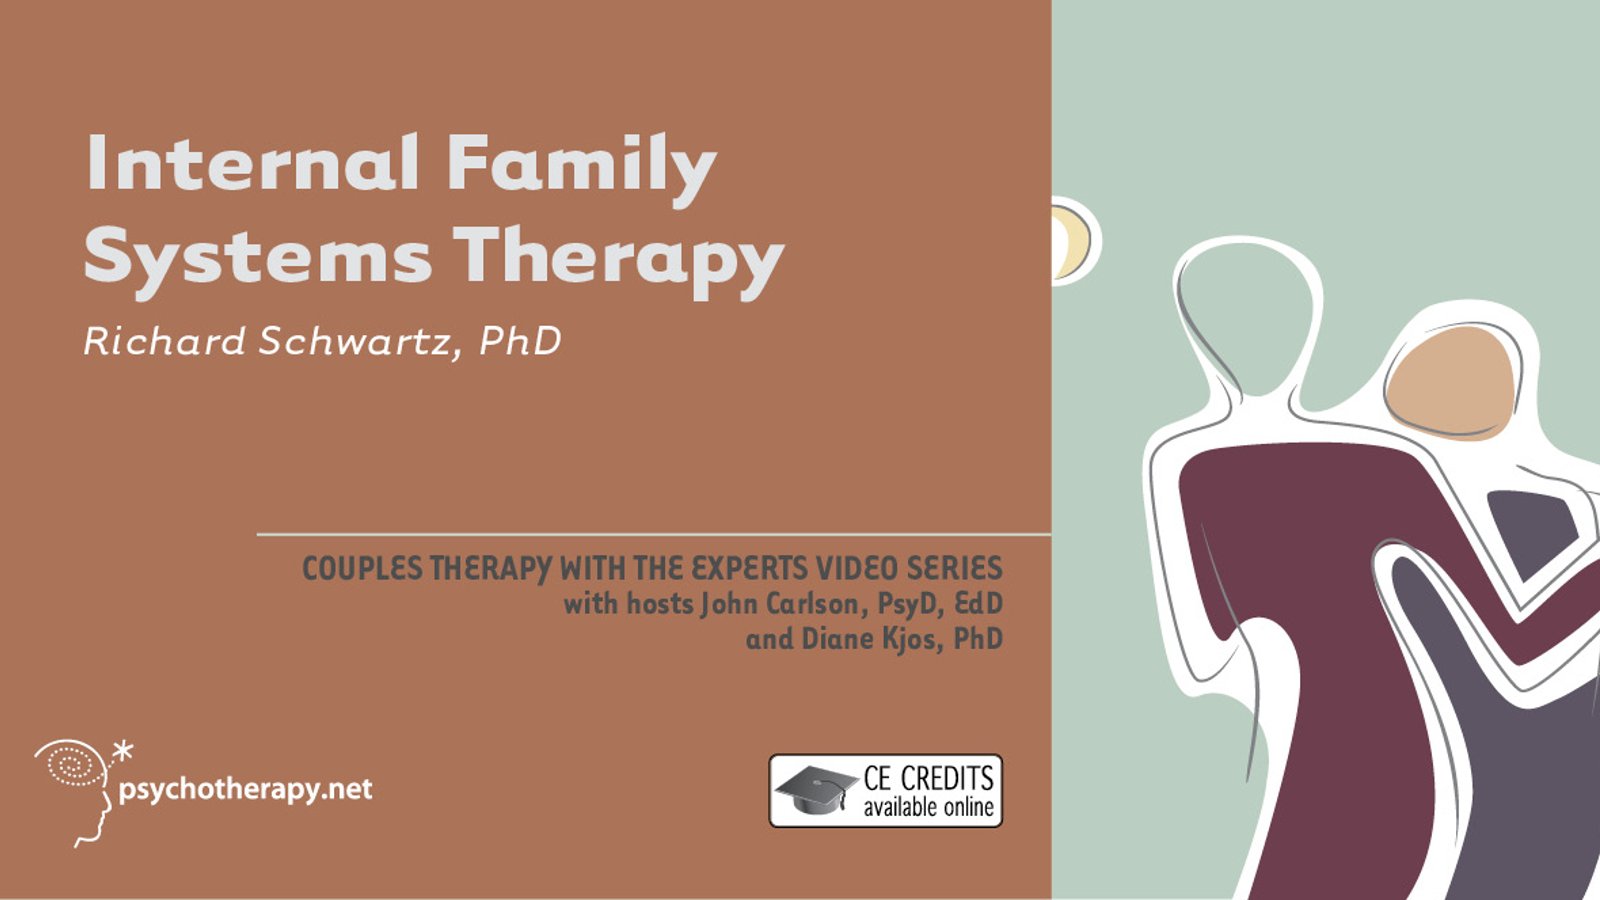 Internal Family Systems Therapy - With Richard Schwartz